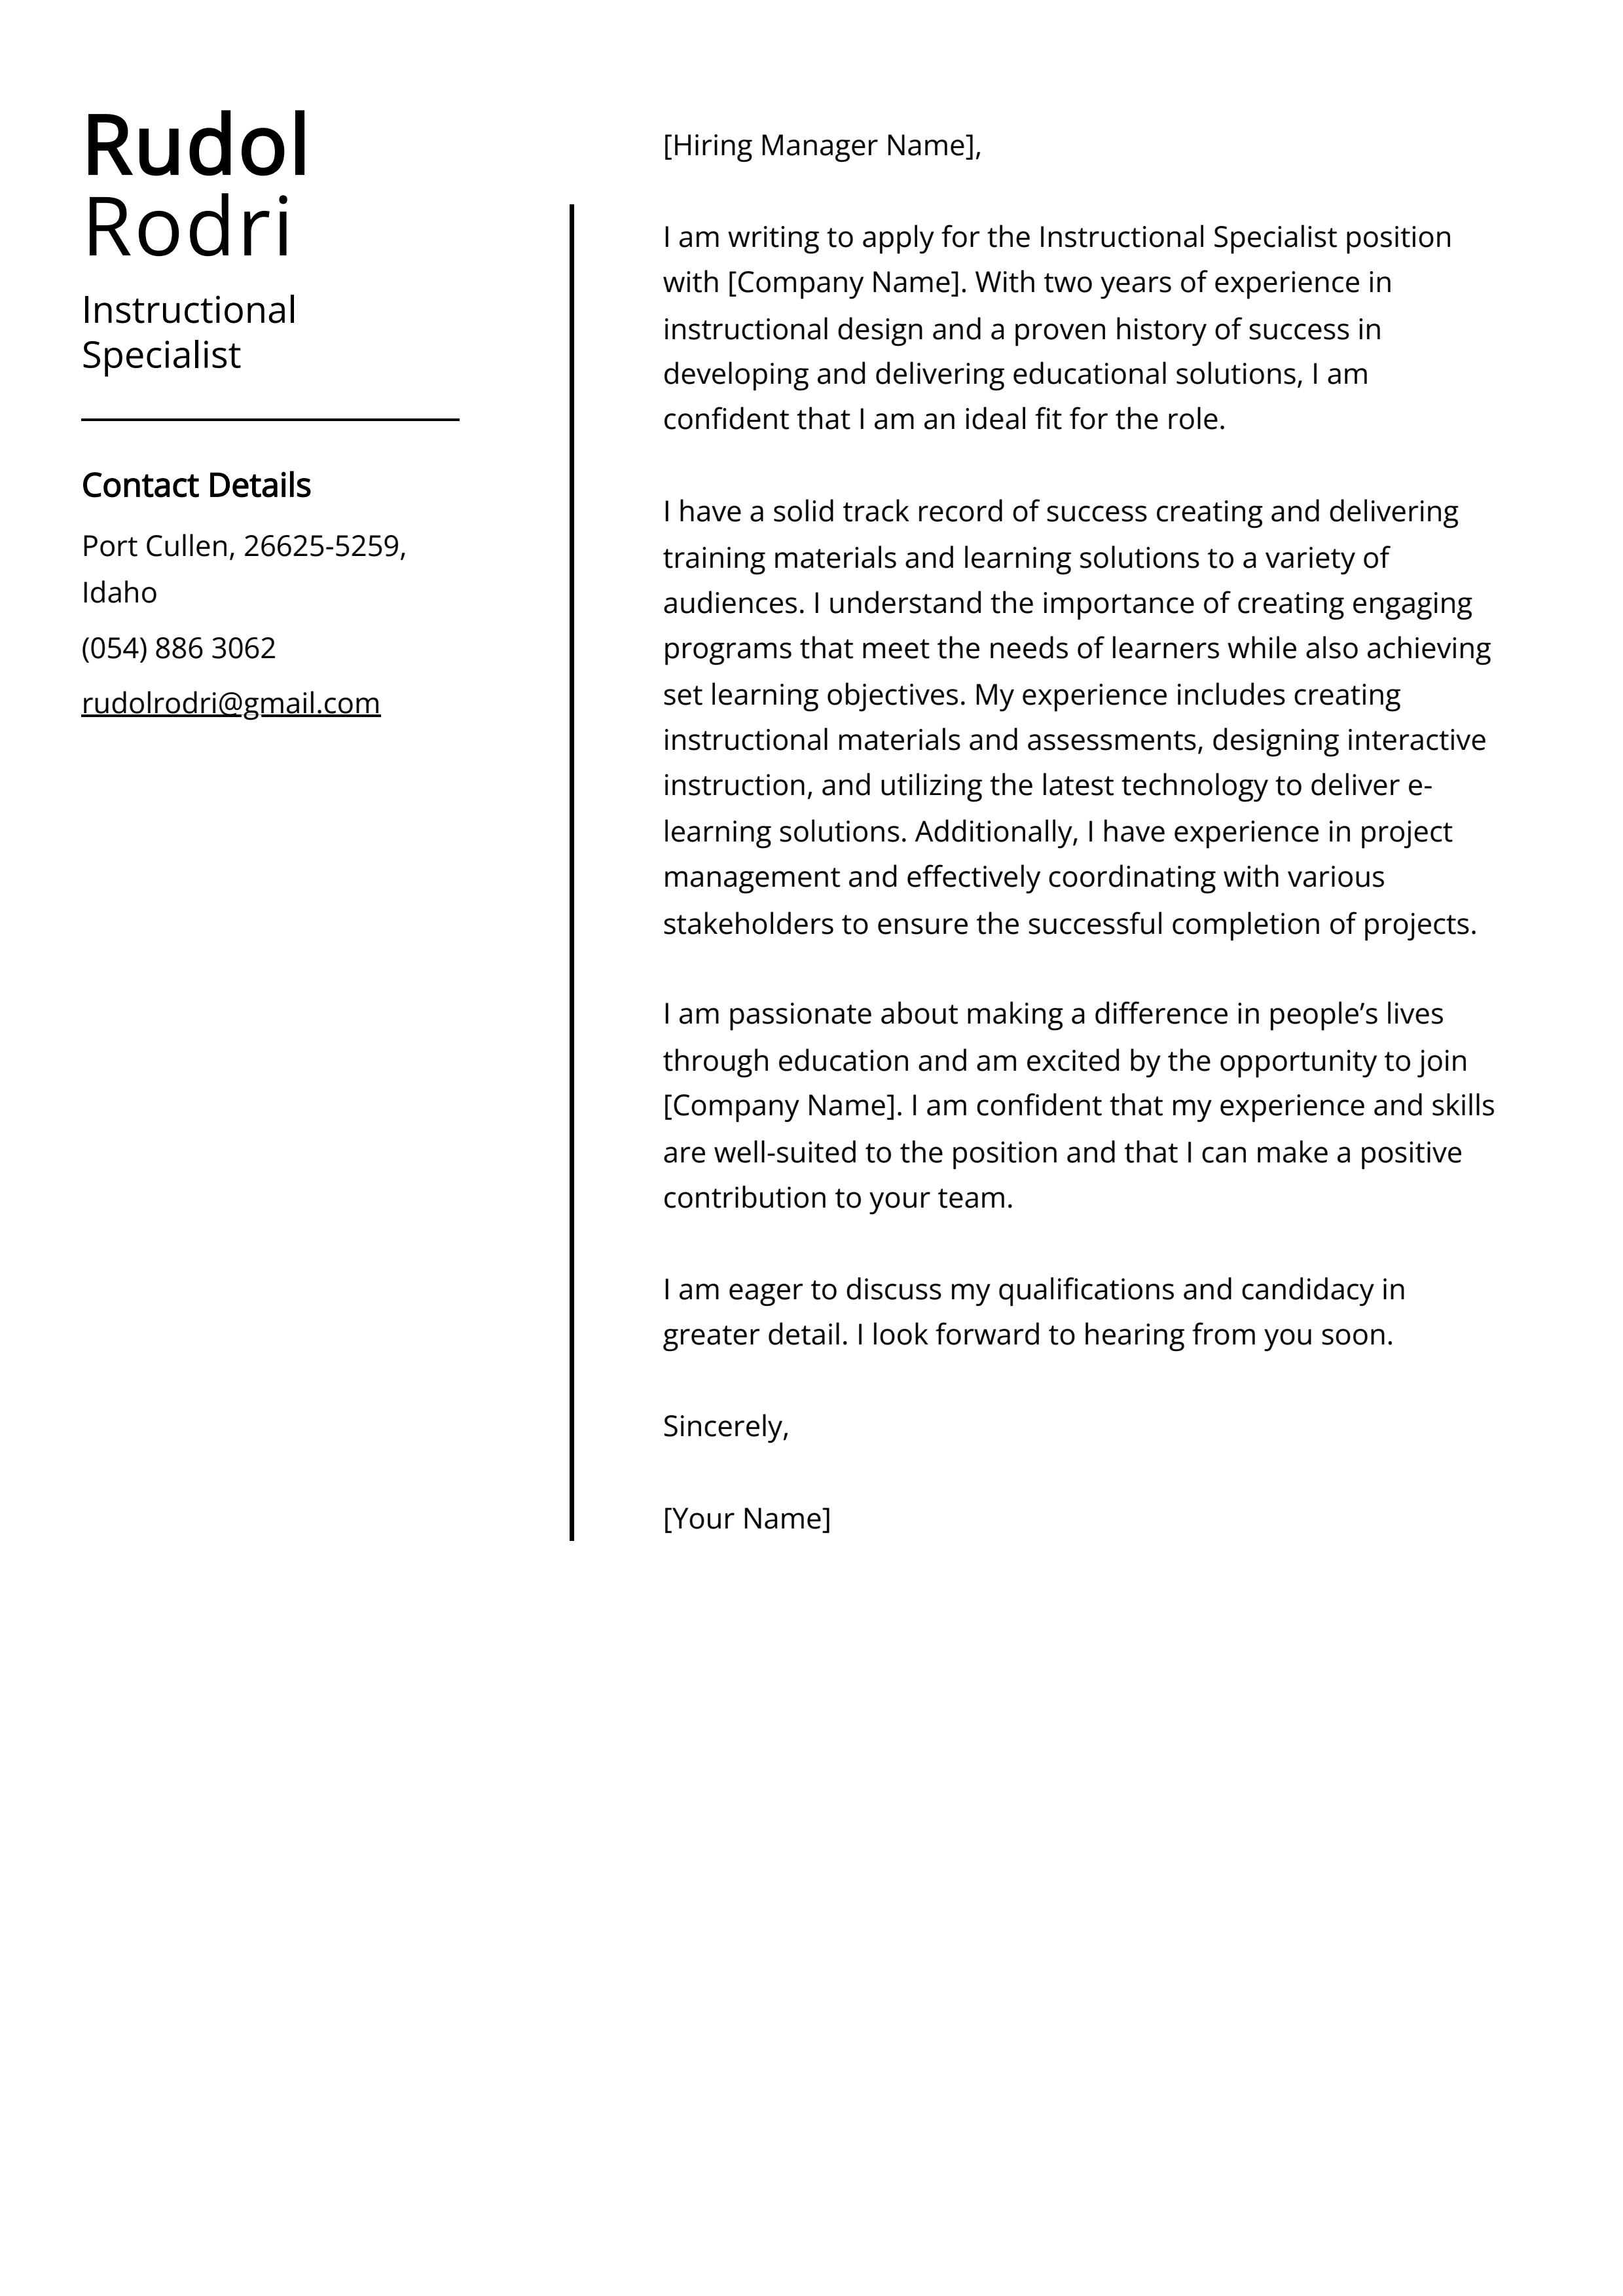 Instructional Specialist Cover Letter Example